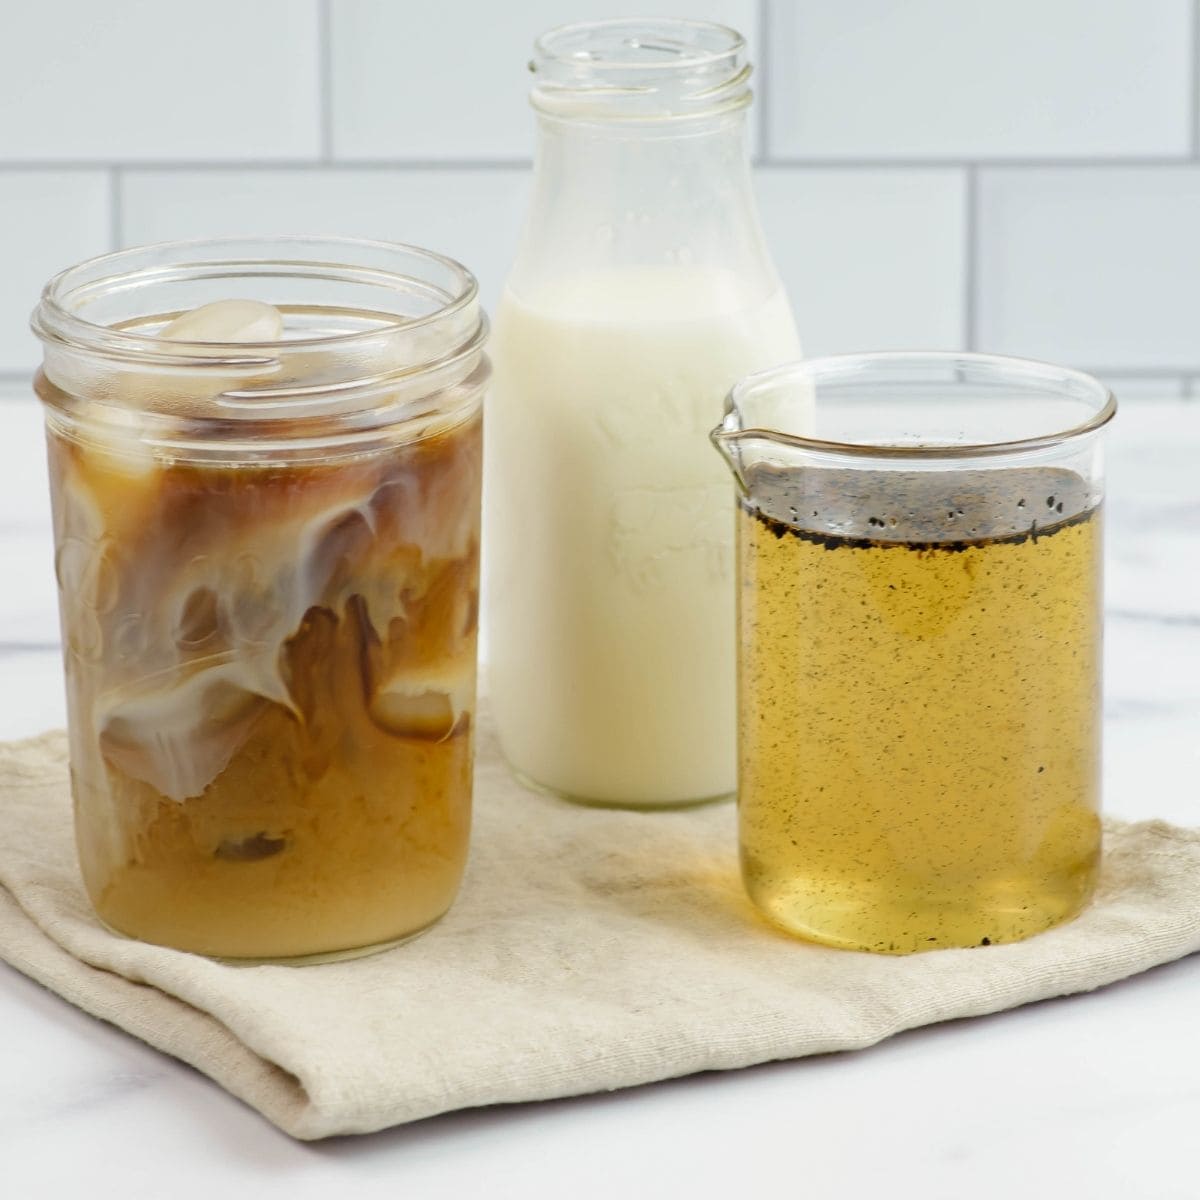 A jar of homemade vanilla coffee syrup next to a bottle of milk and a glass of iced coffee.